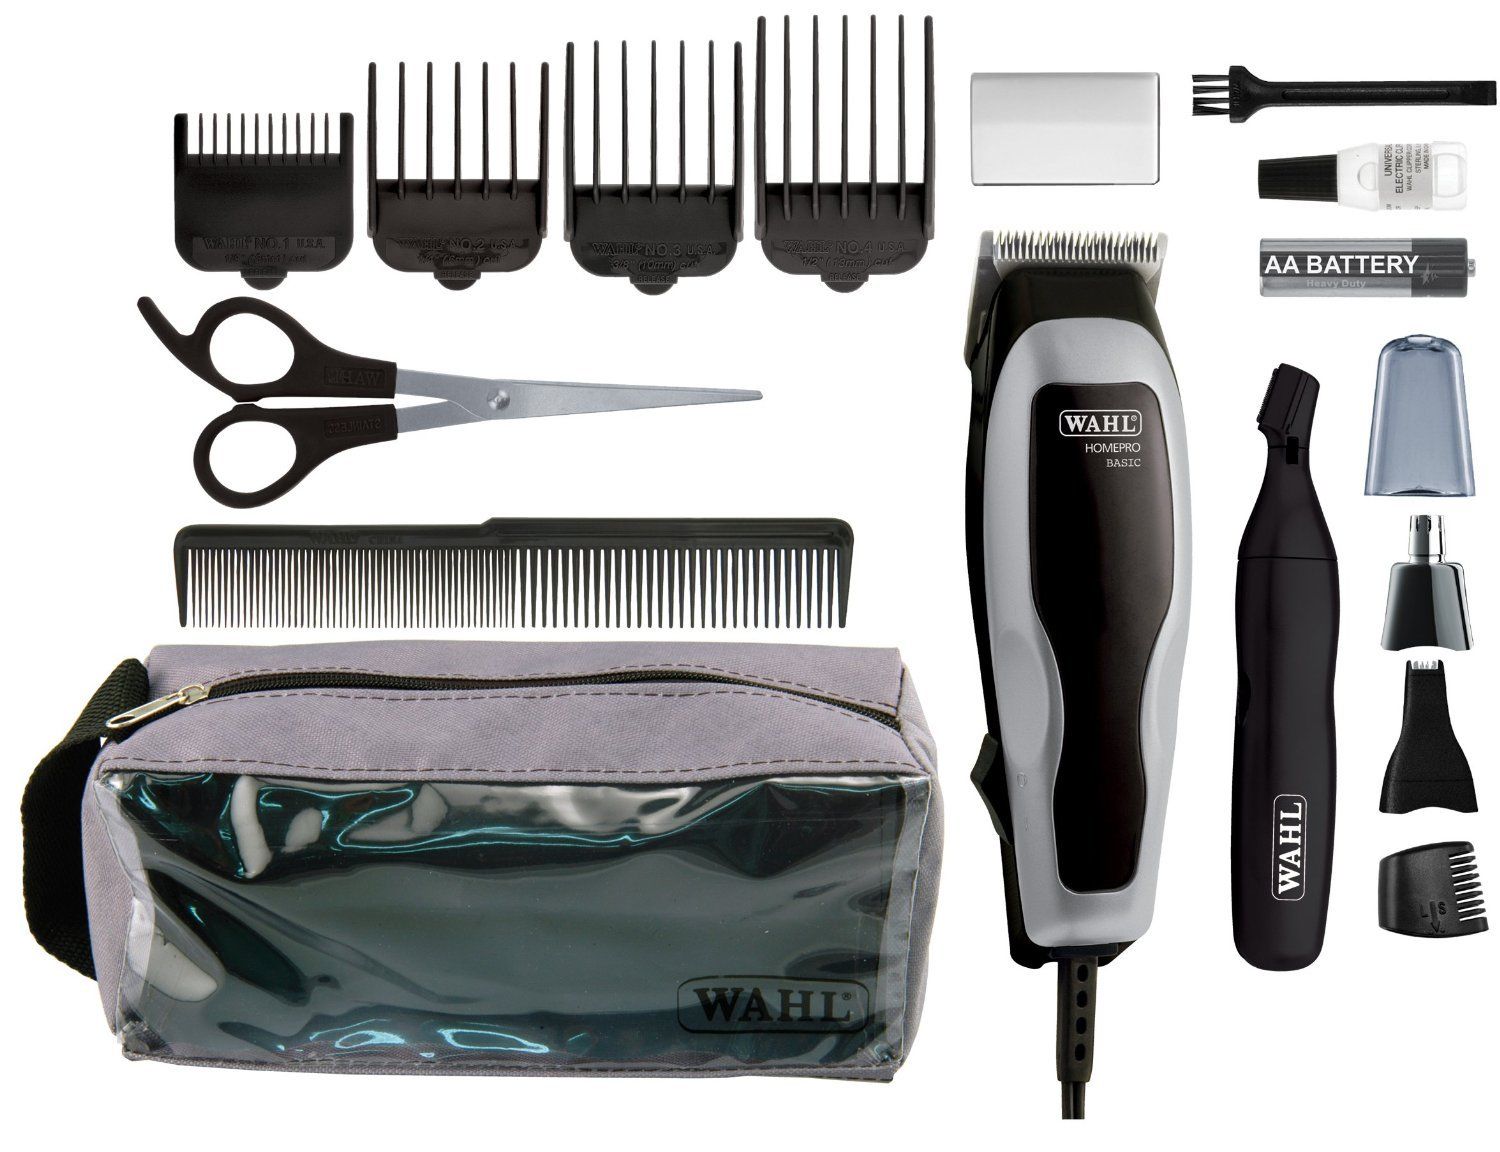 wahl beginner clippers